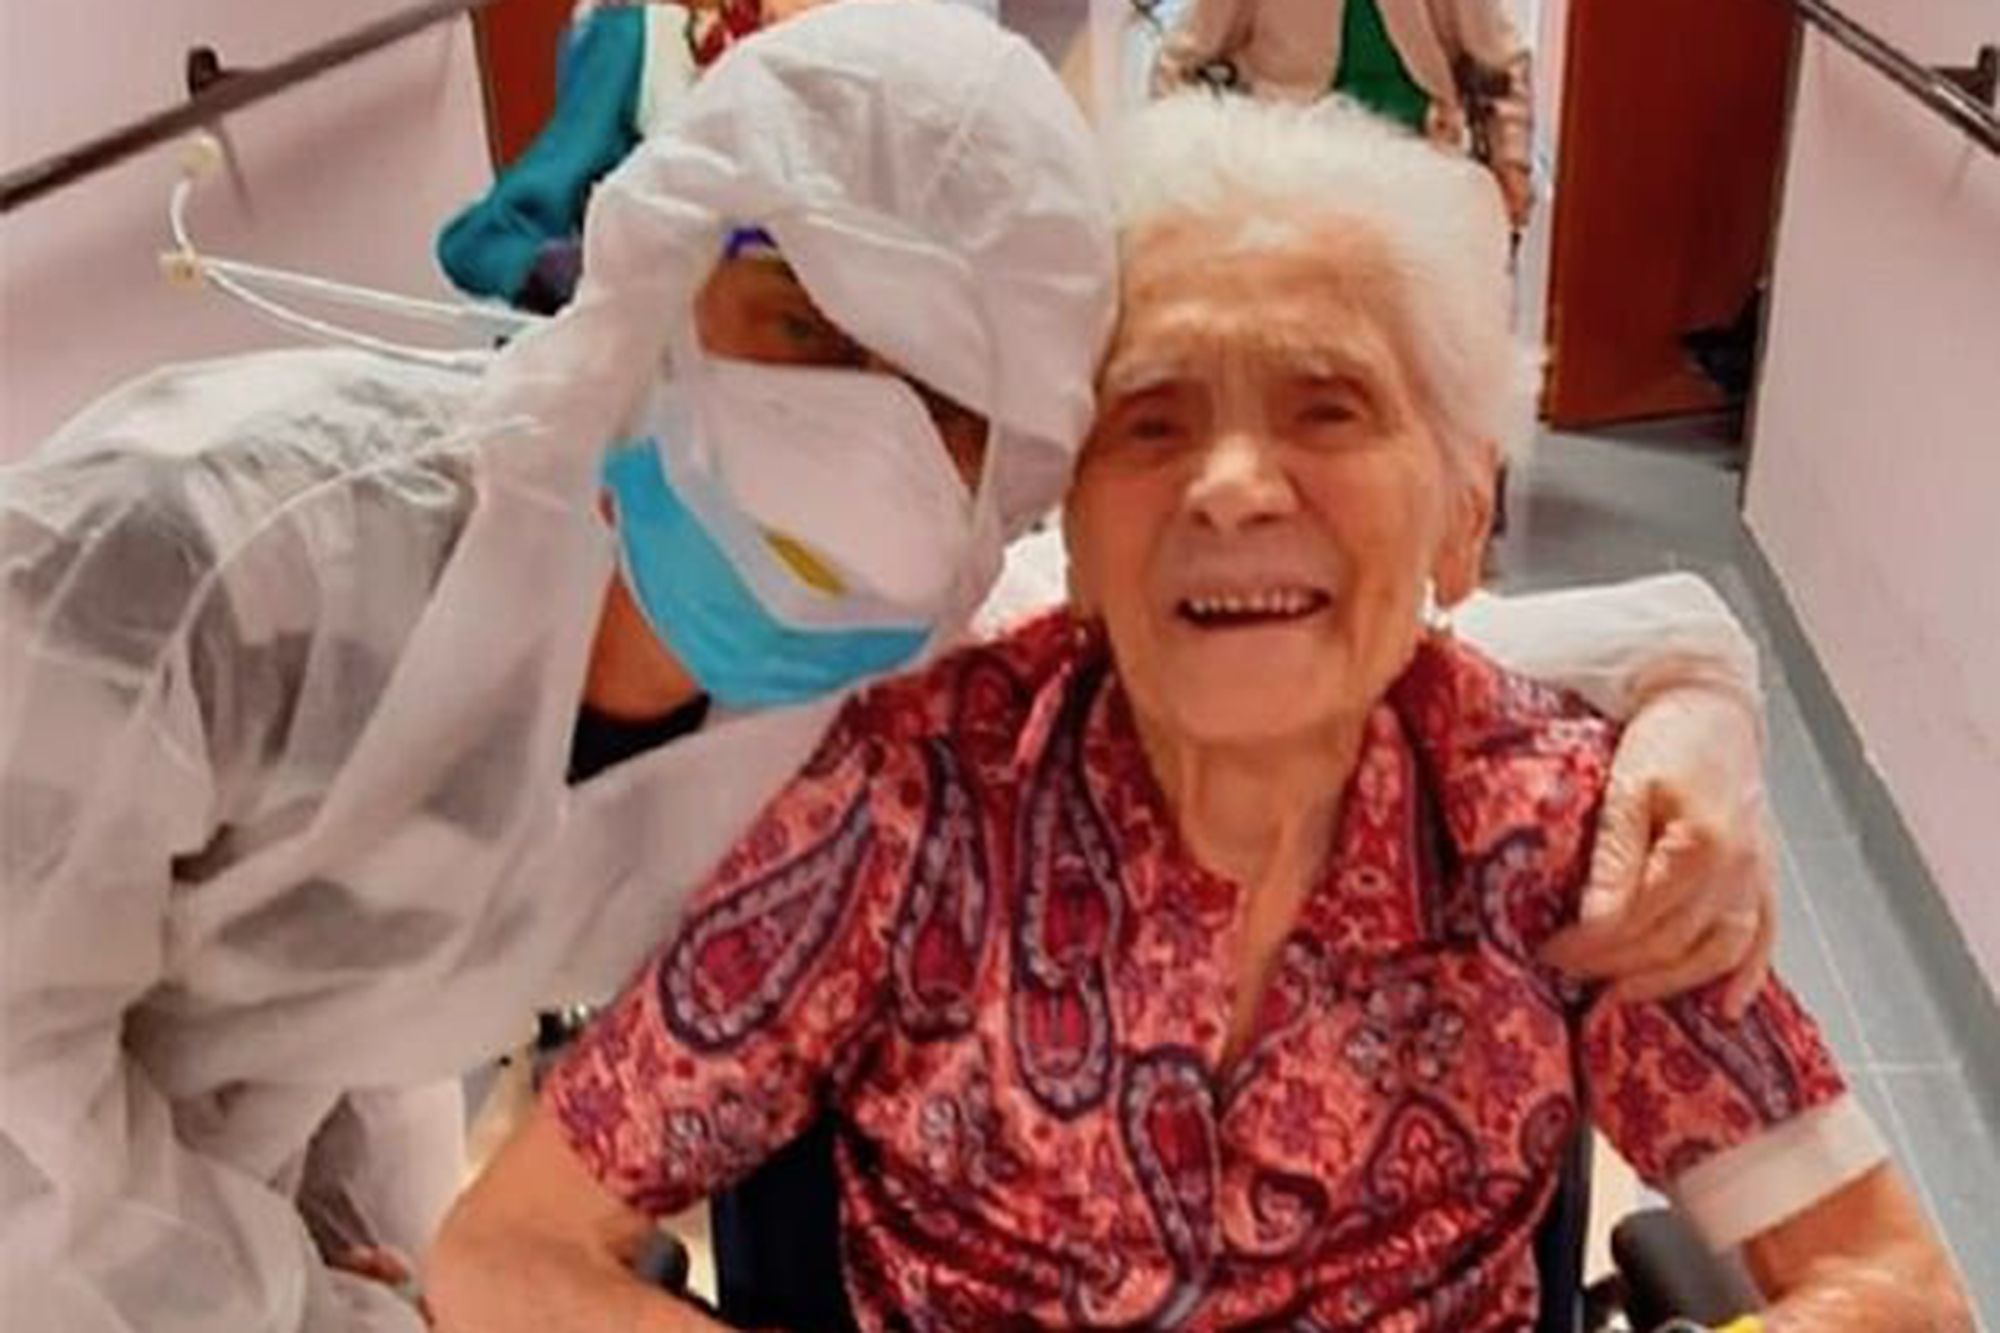 104-year-old USA woman defeats coronavirus with the support of her family